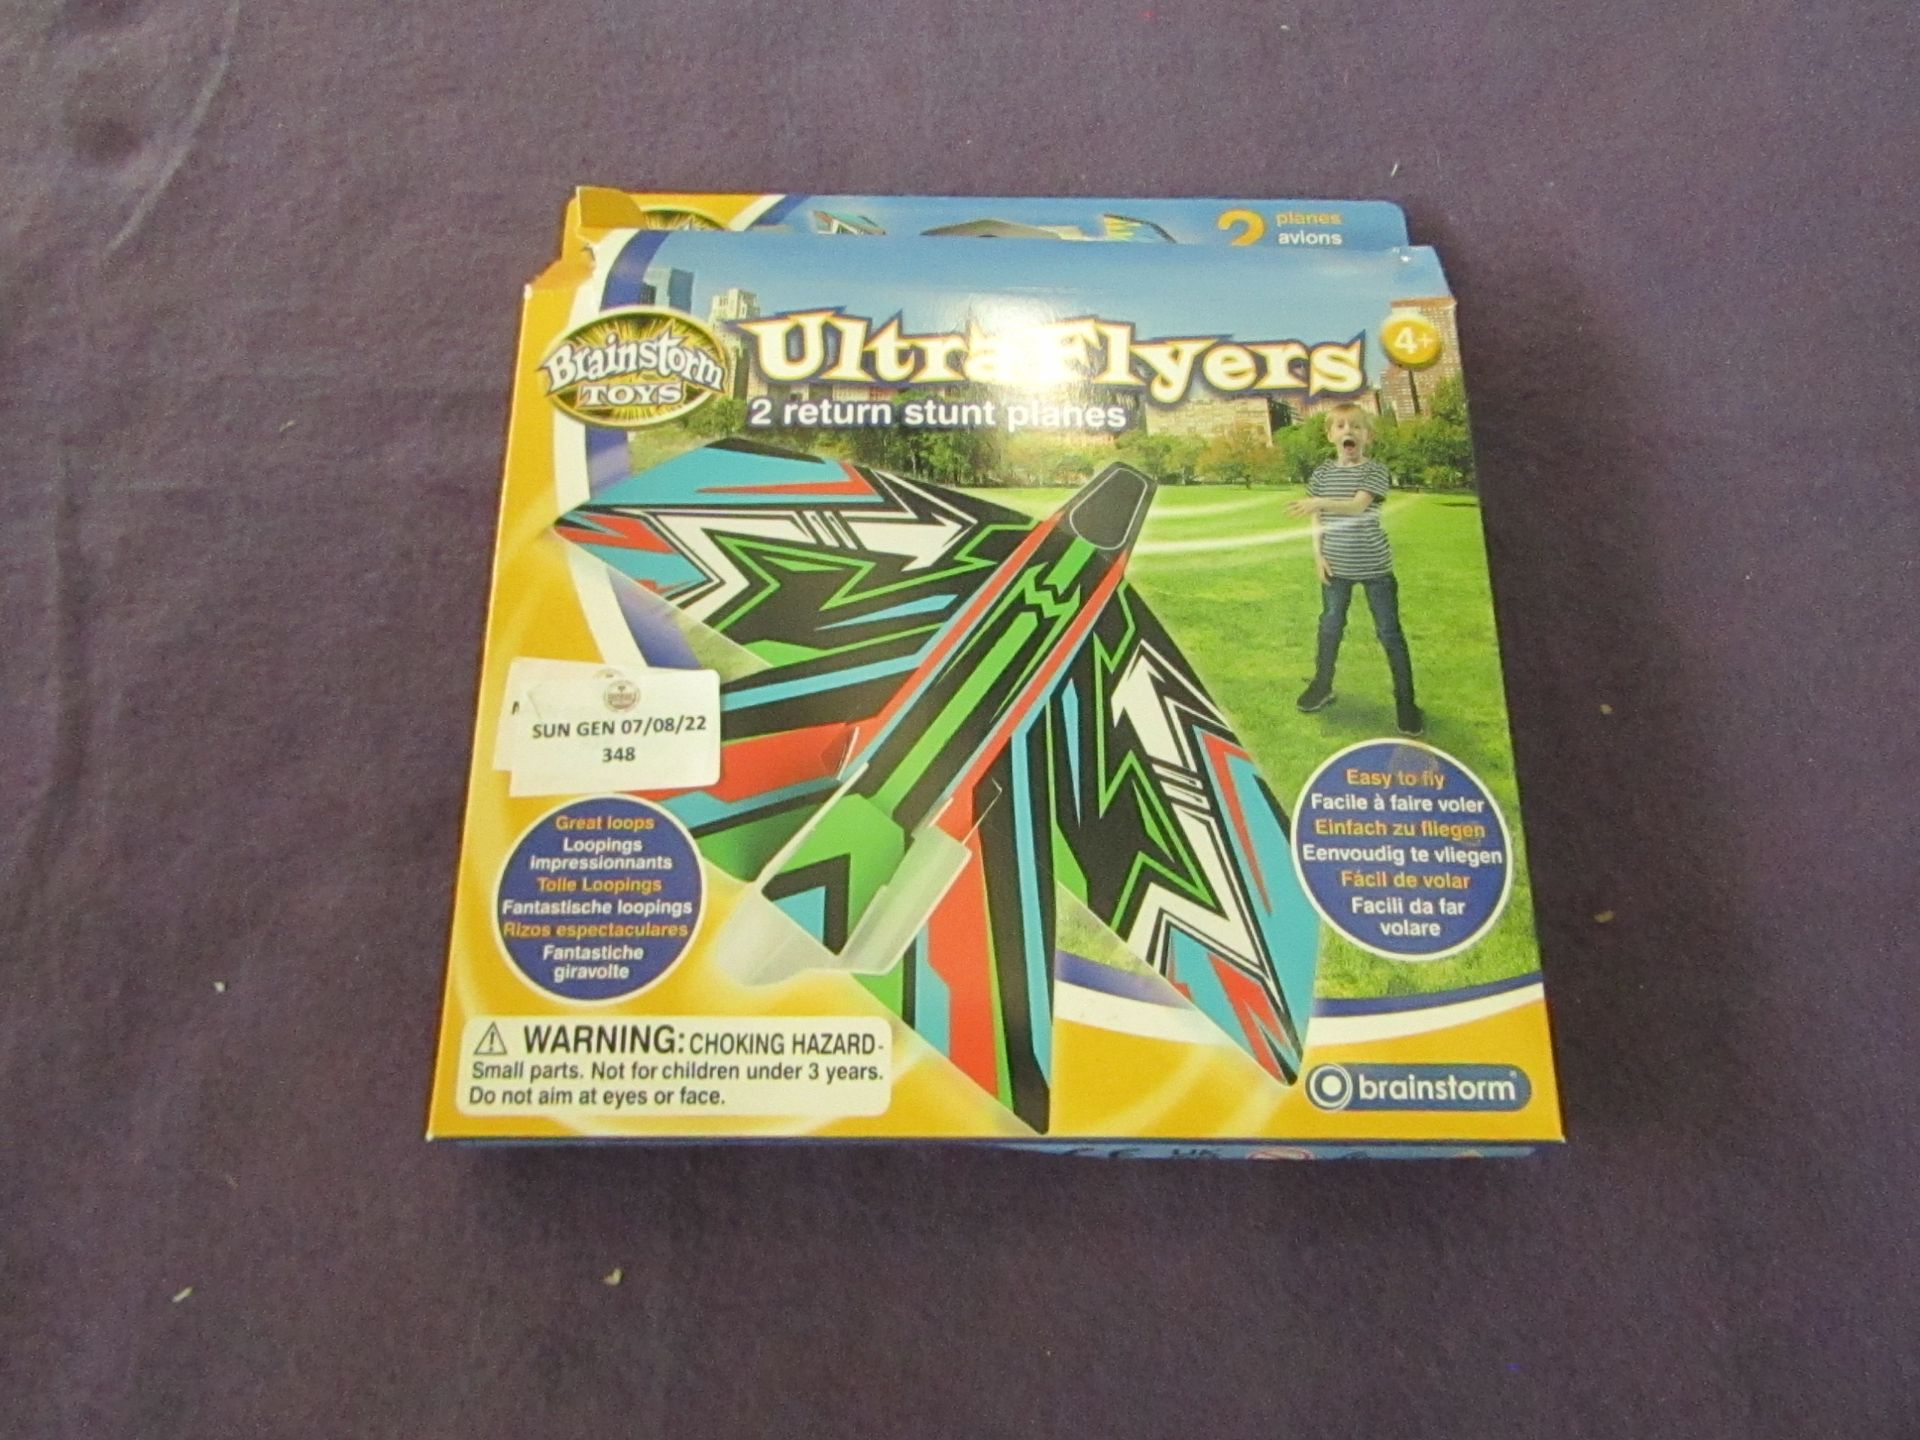 Brainstorm - Ultra Flyers 2 Return Stunt Planes - Unchecked & Boxed.